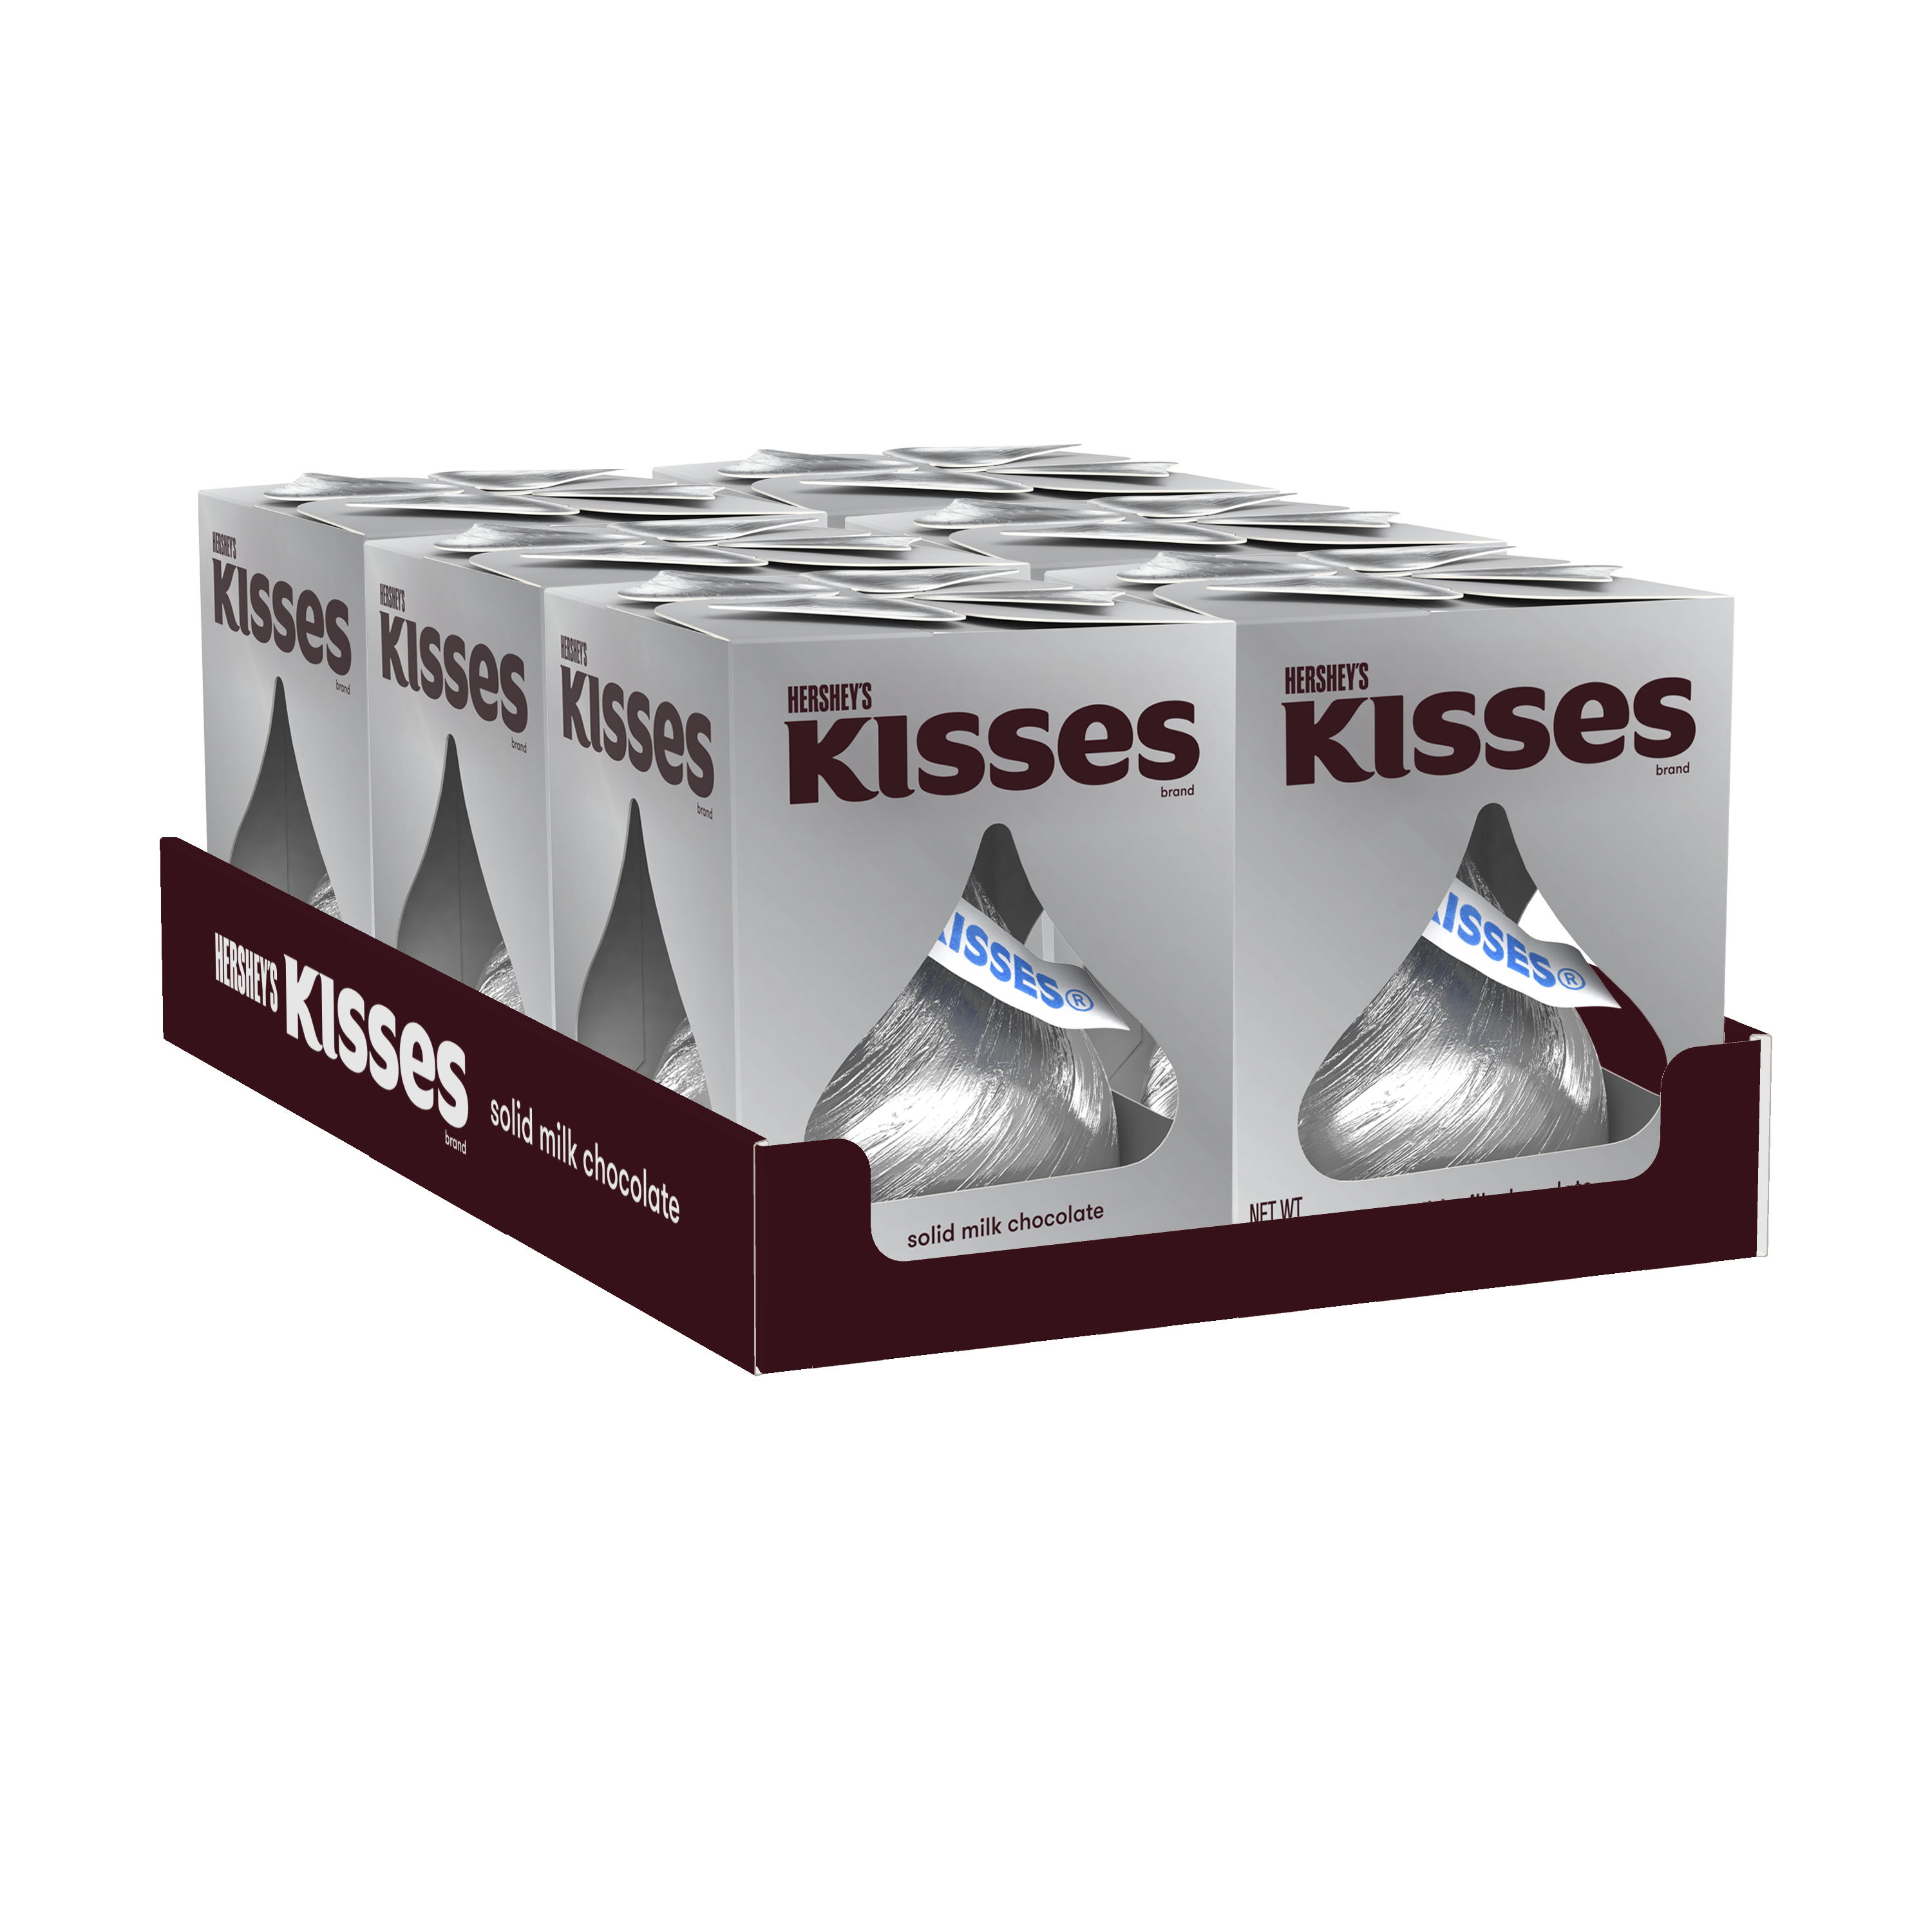 HERSHEY'S KISSES Milk Chocolate Giant Candy, 7 oz box, 6 pack - Left Side of Package